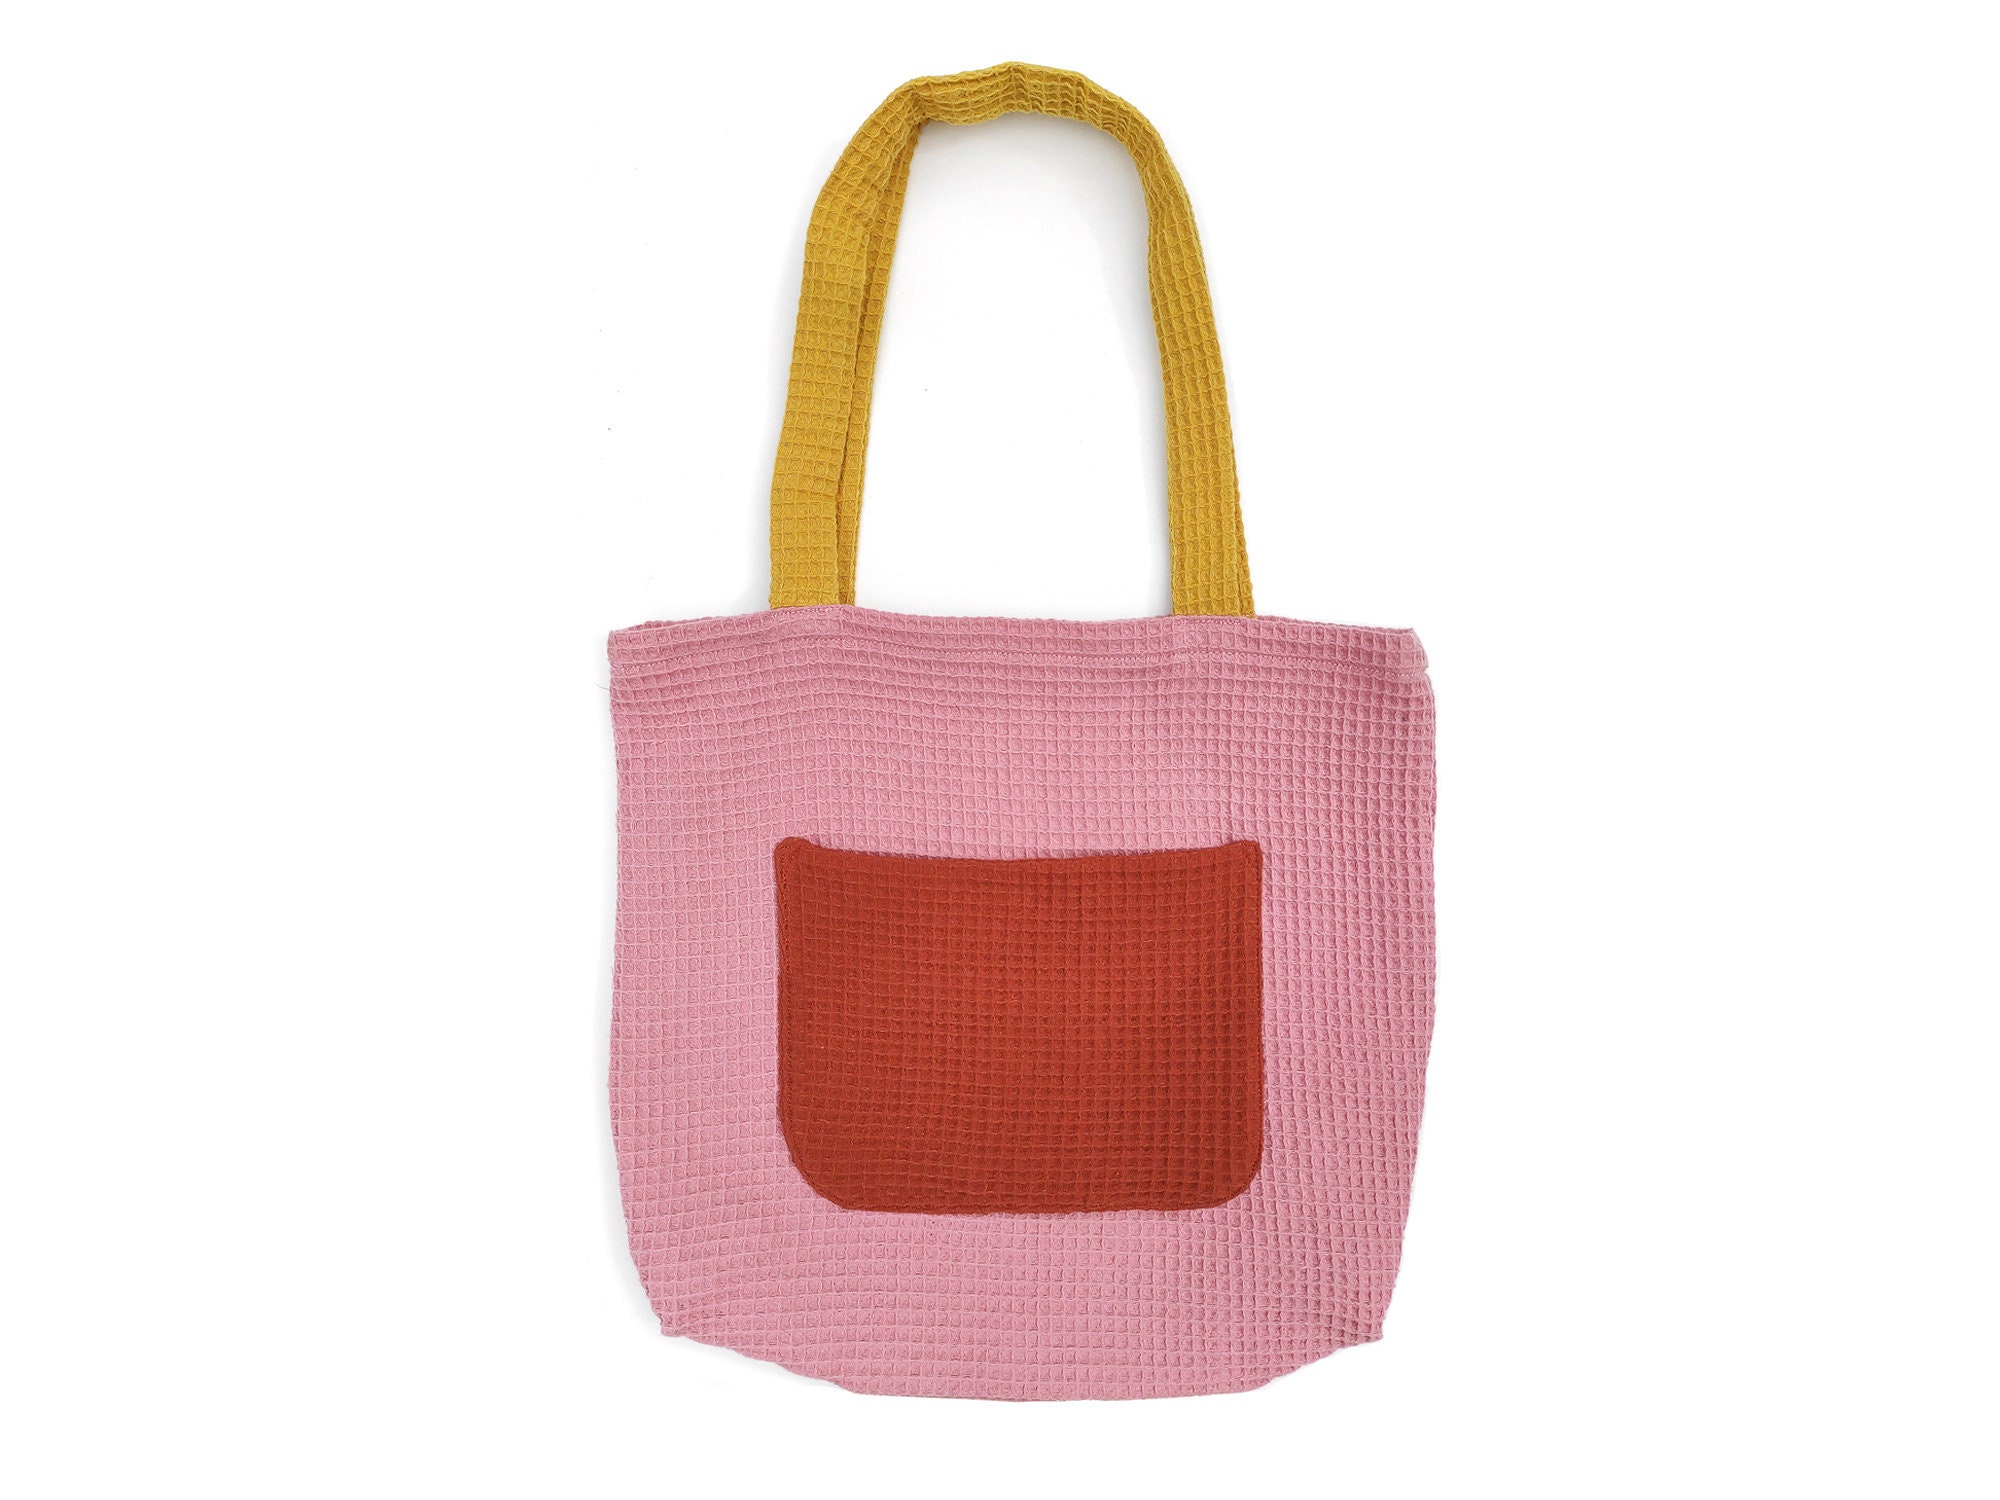 Unique Gifts for Women: Get a Fun Tote Bag With a Smiley Boy Face